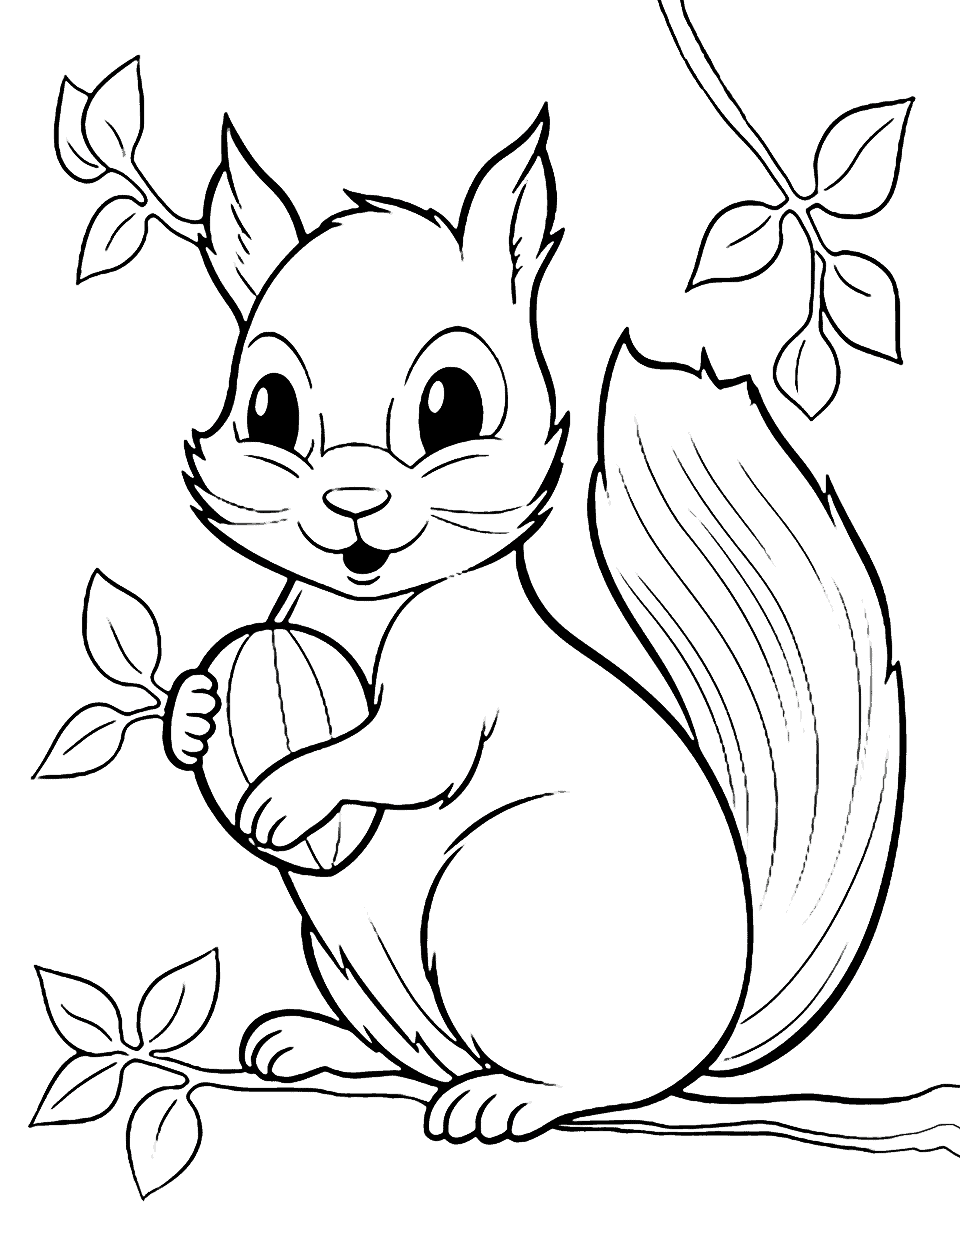 Happy Squirrel Animal Coloring Page - A squirrel with a nut in its paws sitting on a tree branch.